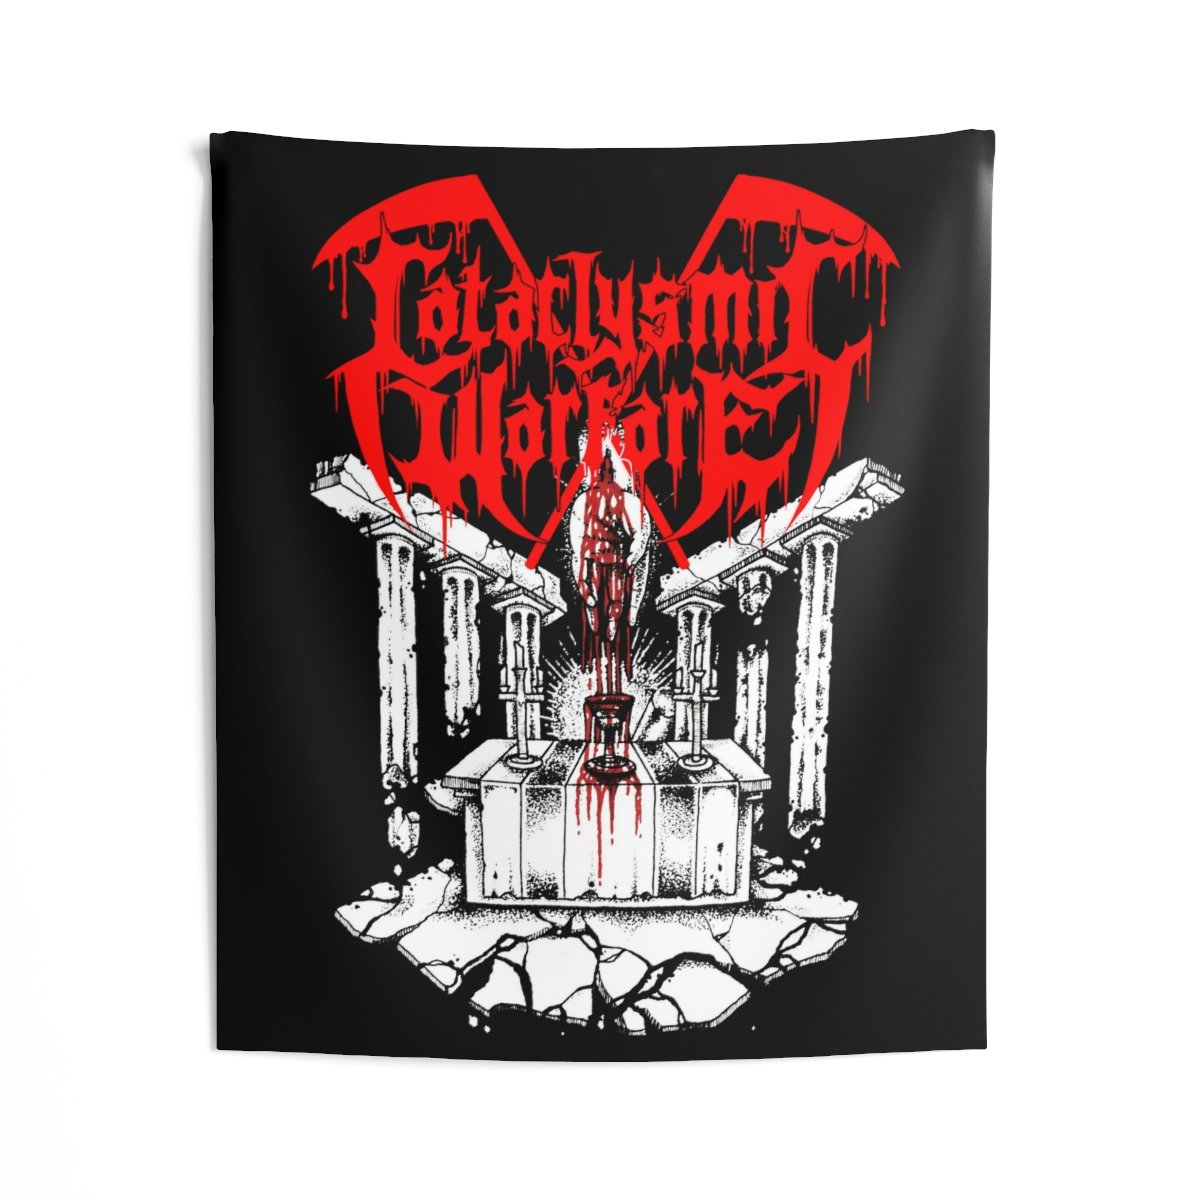 Cataclysmic Warfare – Drink The Blood Indoor Wall Tapestries